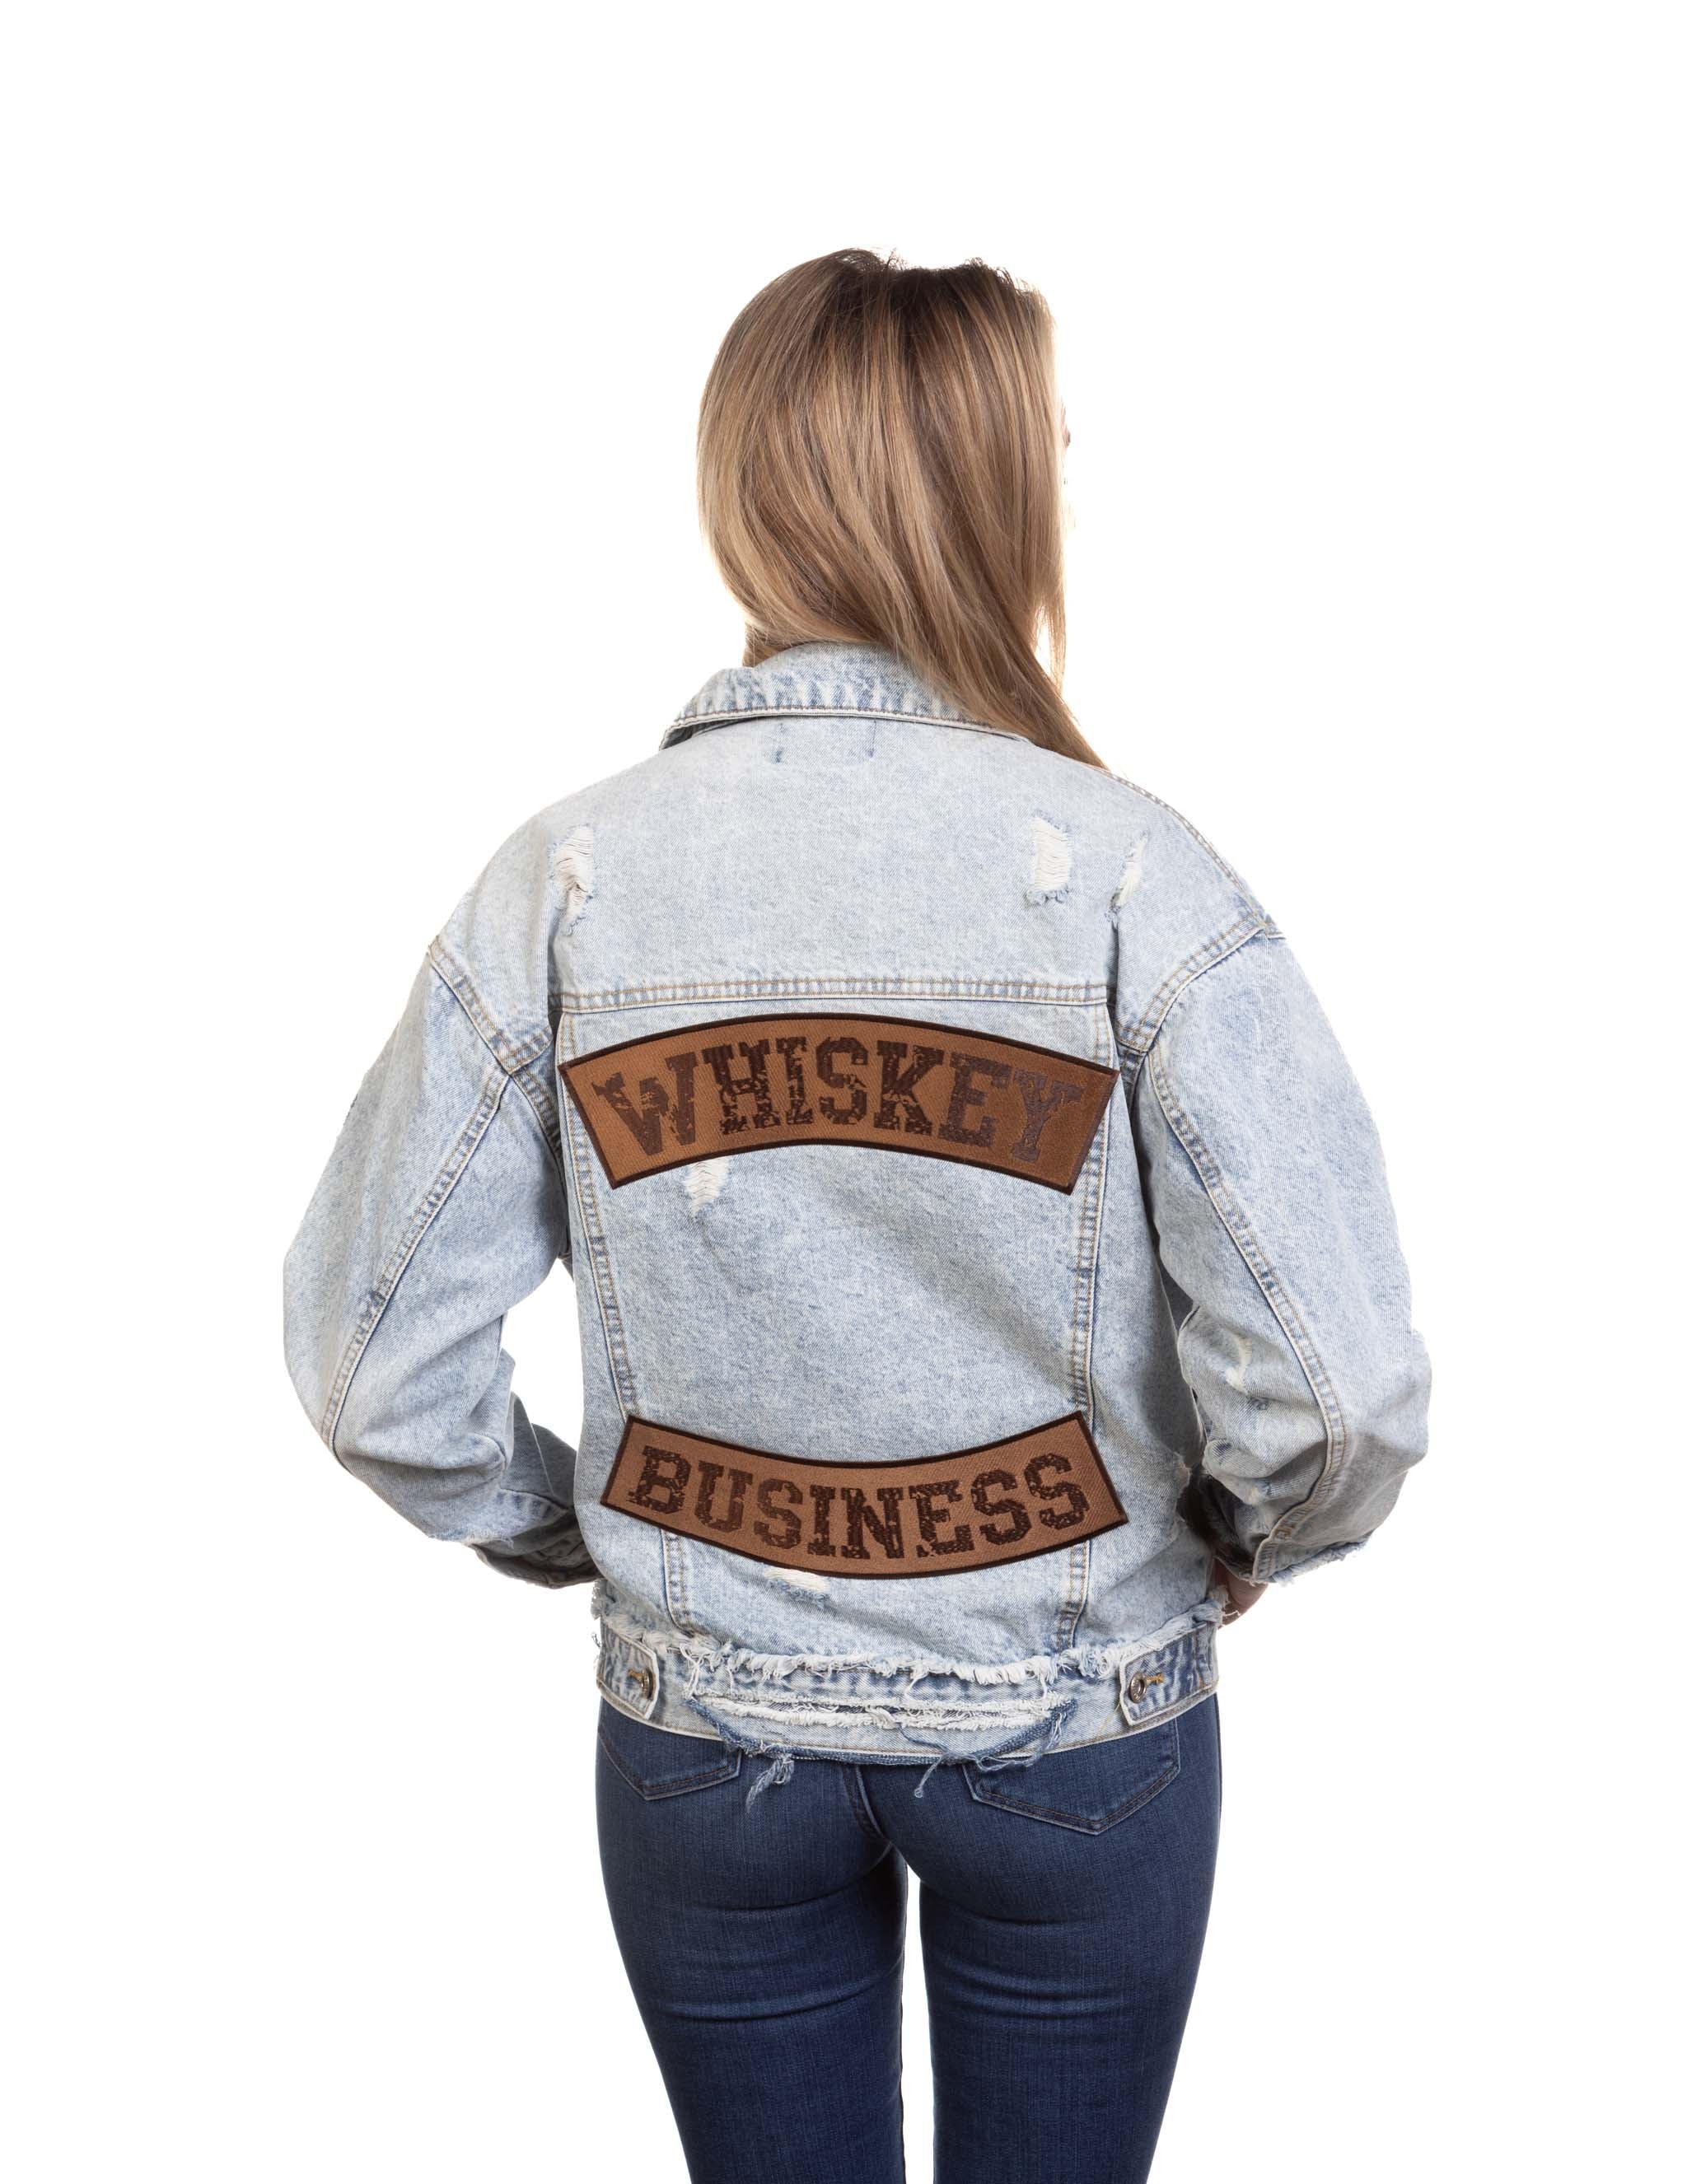 Ole Red Whiskey Business Patch Denim Jacket